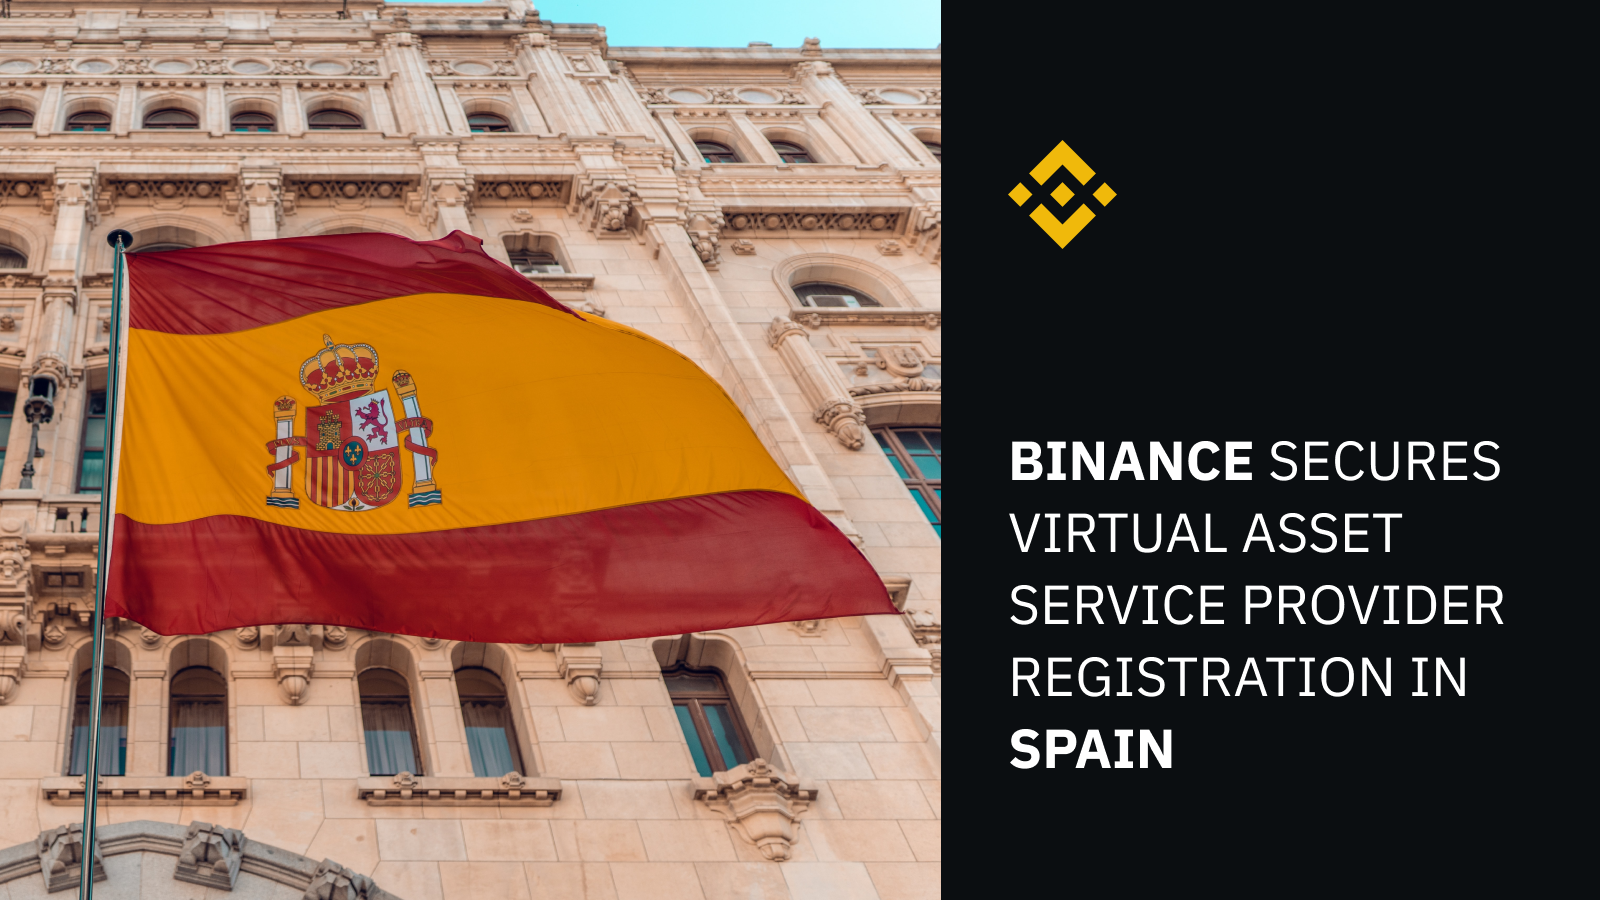 Binance subsidiary authorized to offer cryptocurrency services in Spain